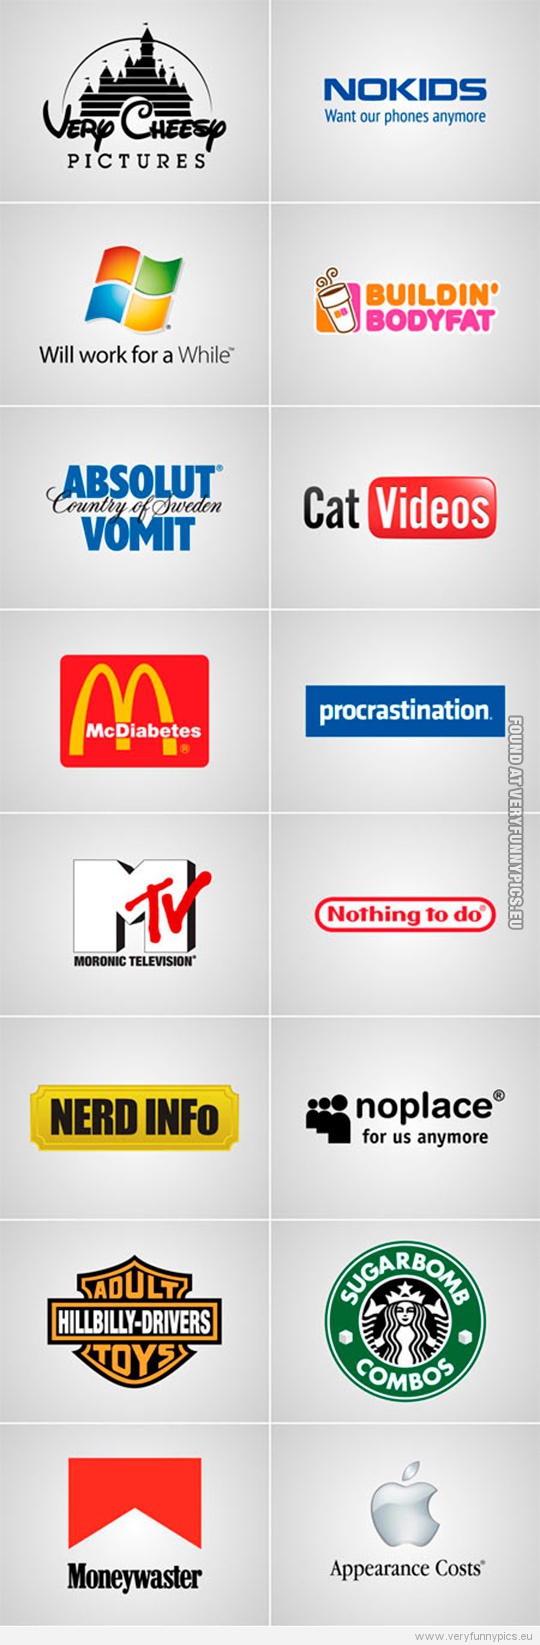 Funny Picture - What the logos really says